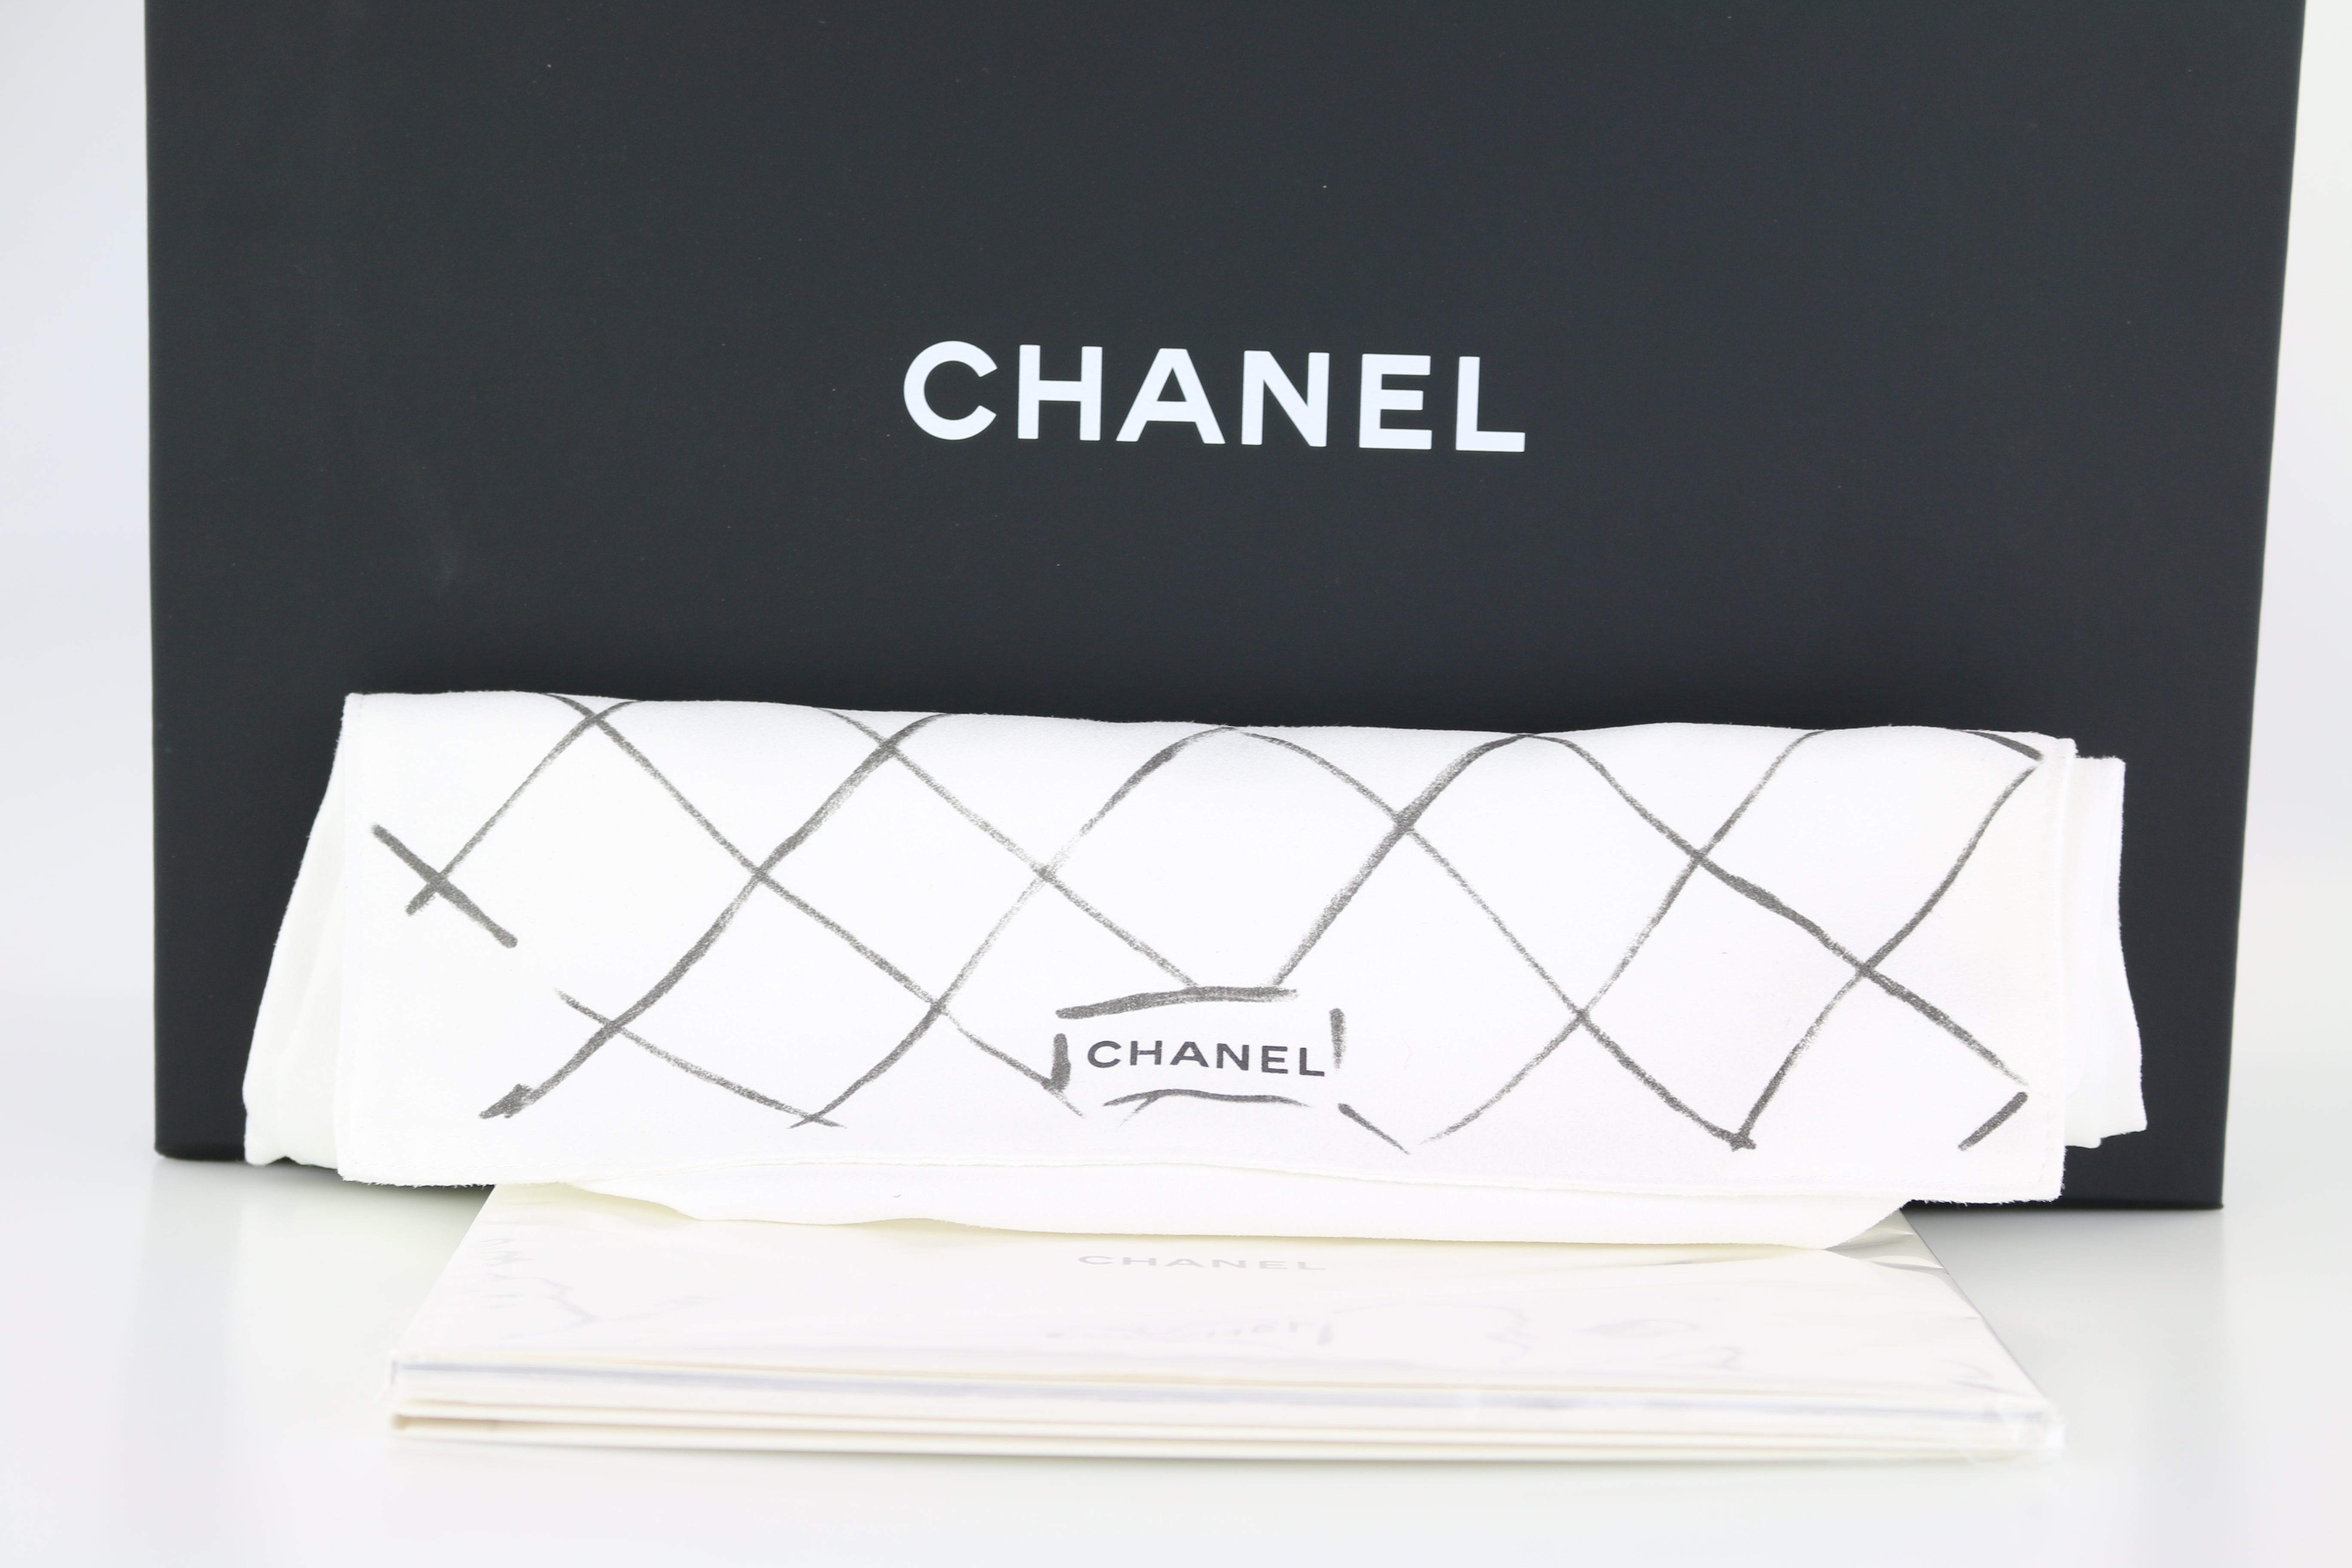 CHANEL Timeless 2.55 Flap Bag Patent Leather Cream Circa 2000 - Chelsea  Vintage Couture